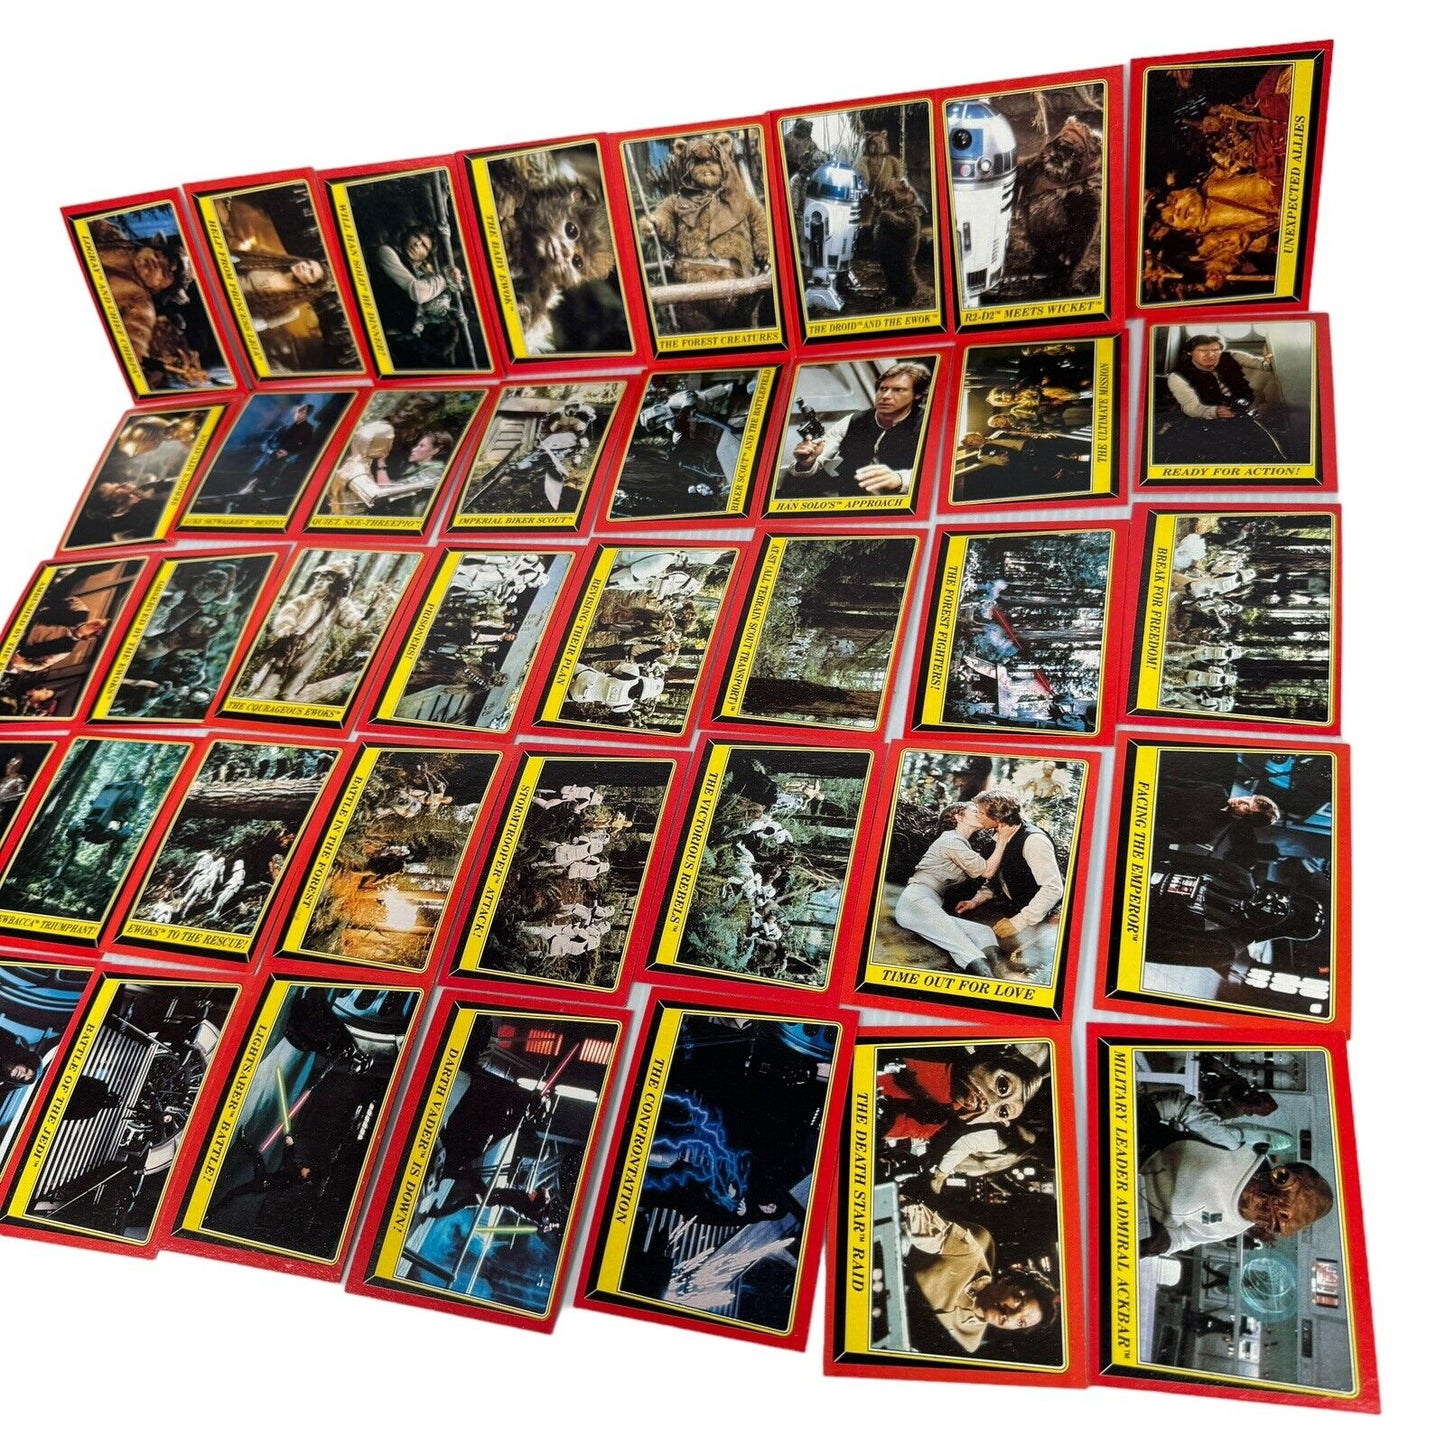 1983 Topps Return of the Jedi trading cards NEAR complete set Missing 3, 4, 132